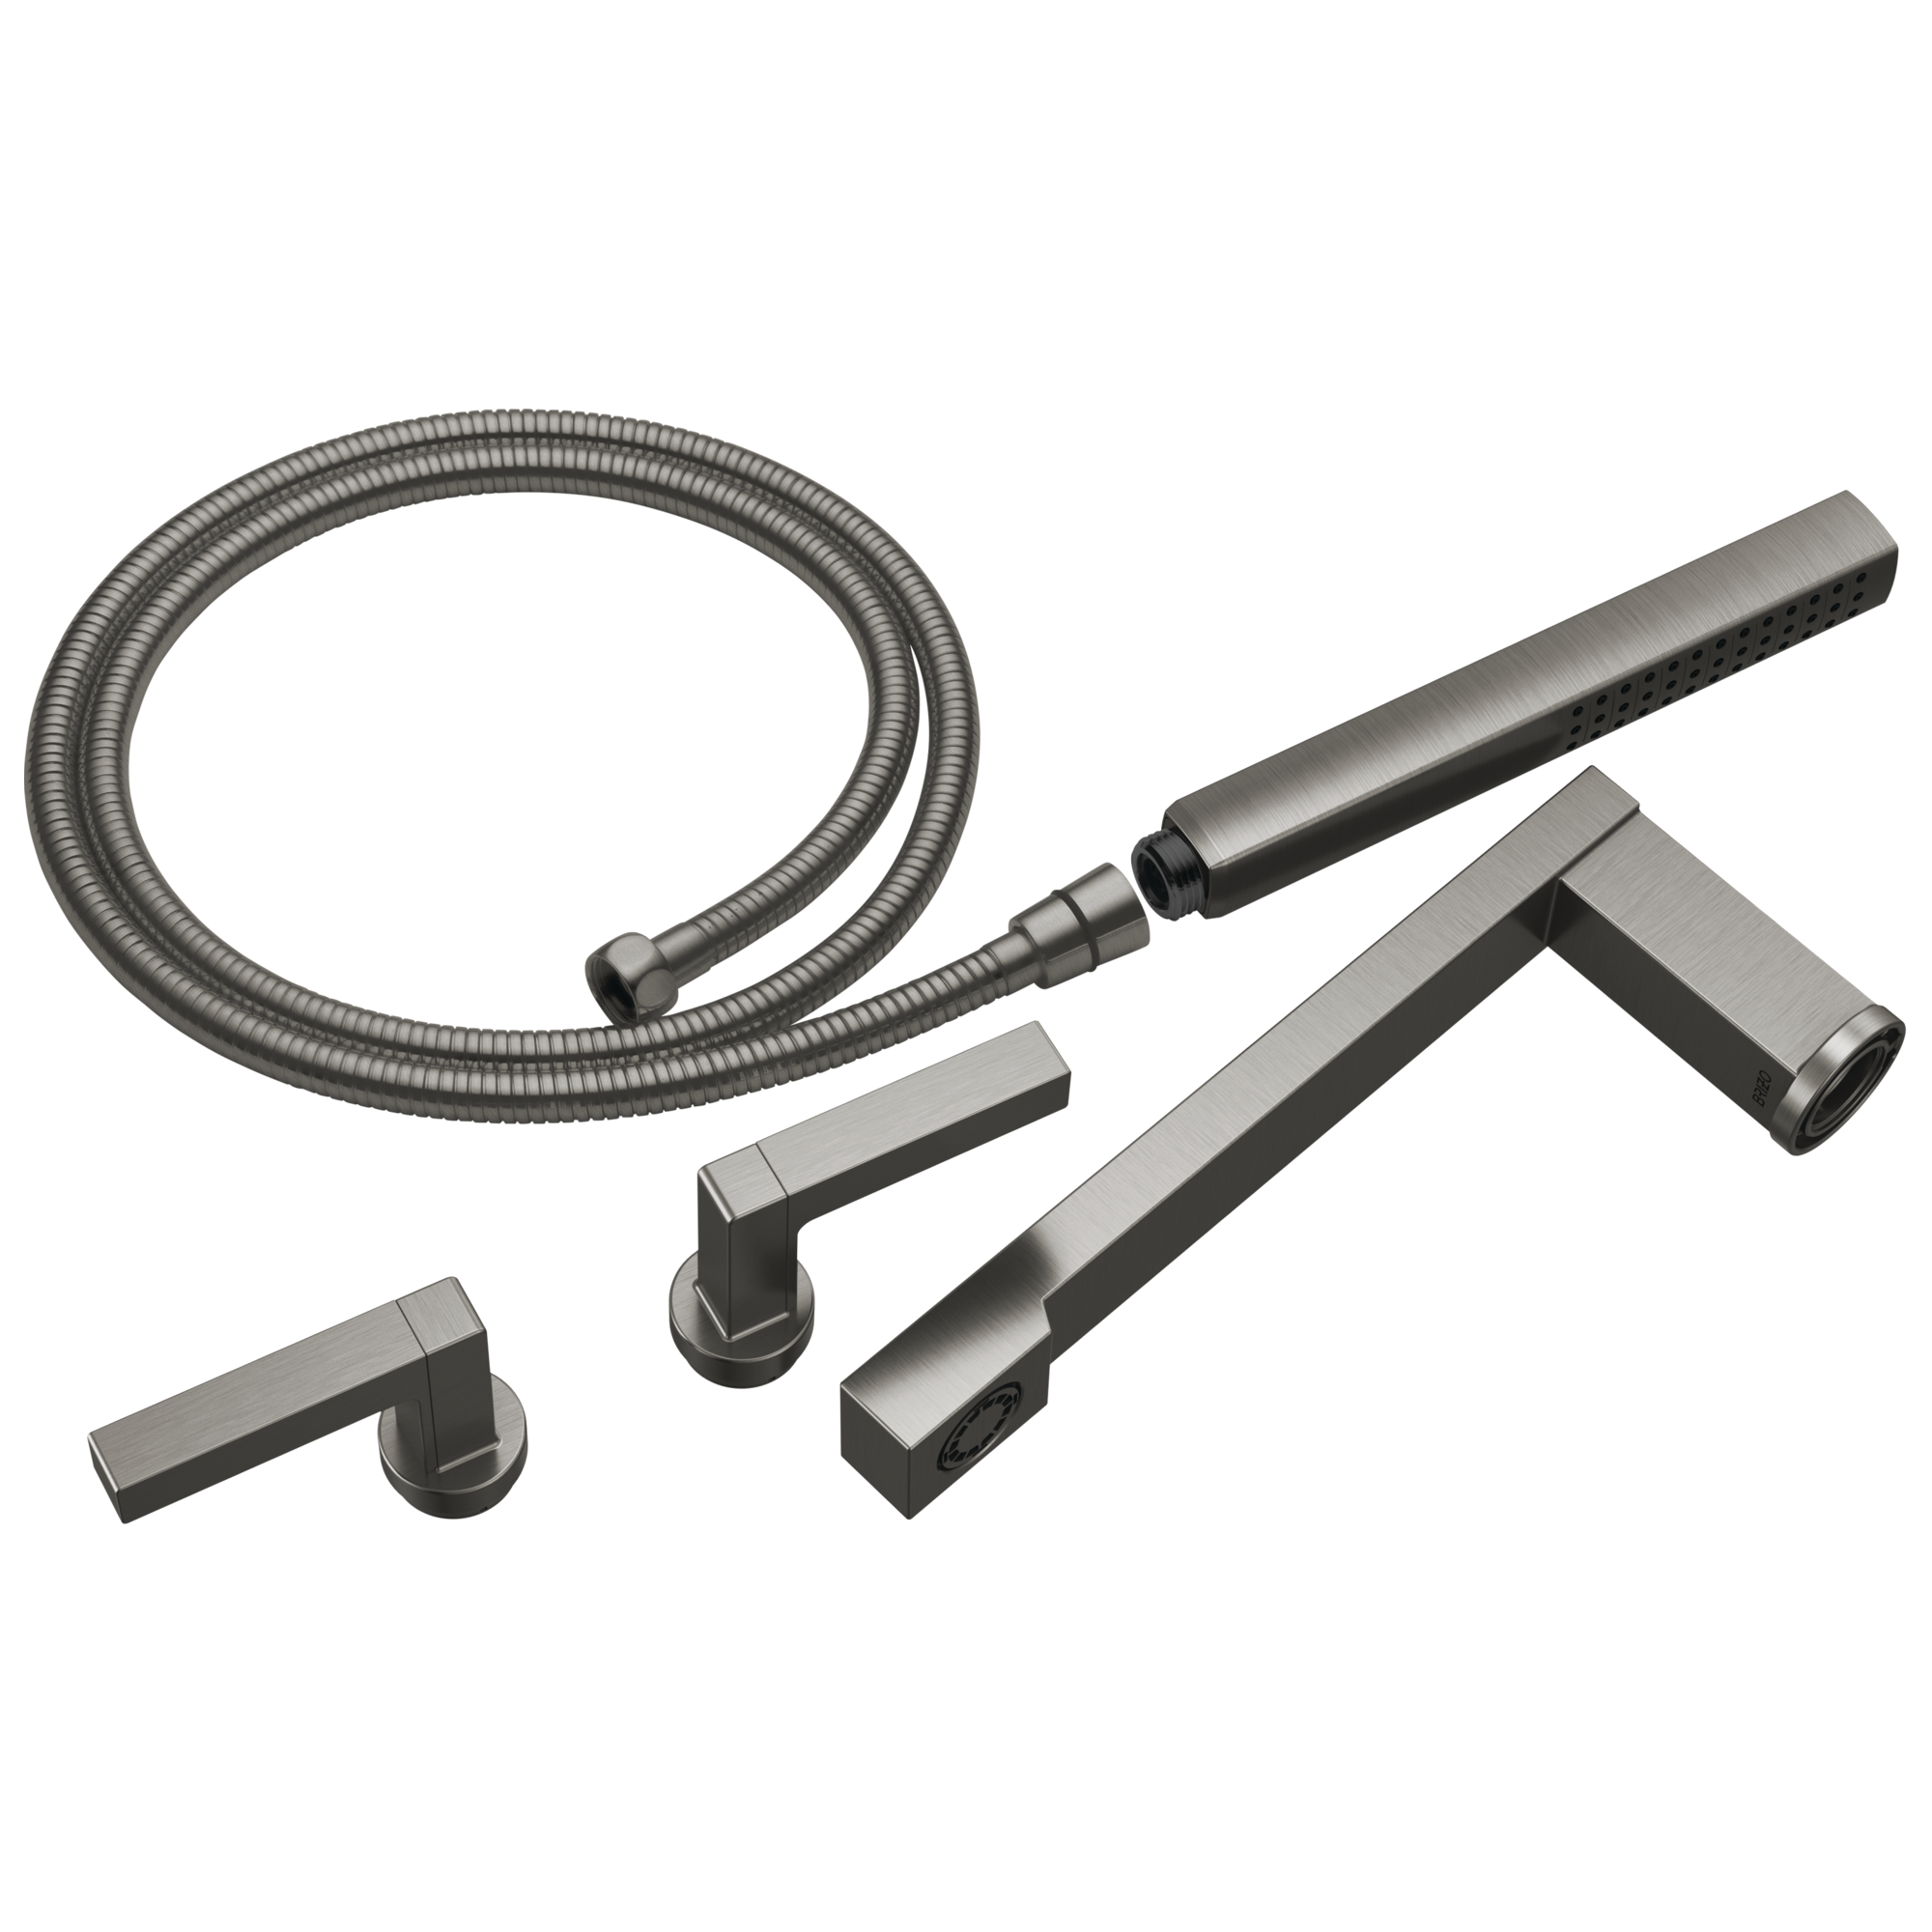 Brizo Frank Lloyd Wright Two-Handle Tub Filler Trim Kit with Lever Handles